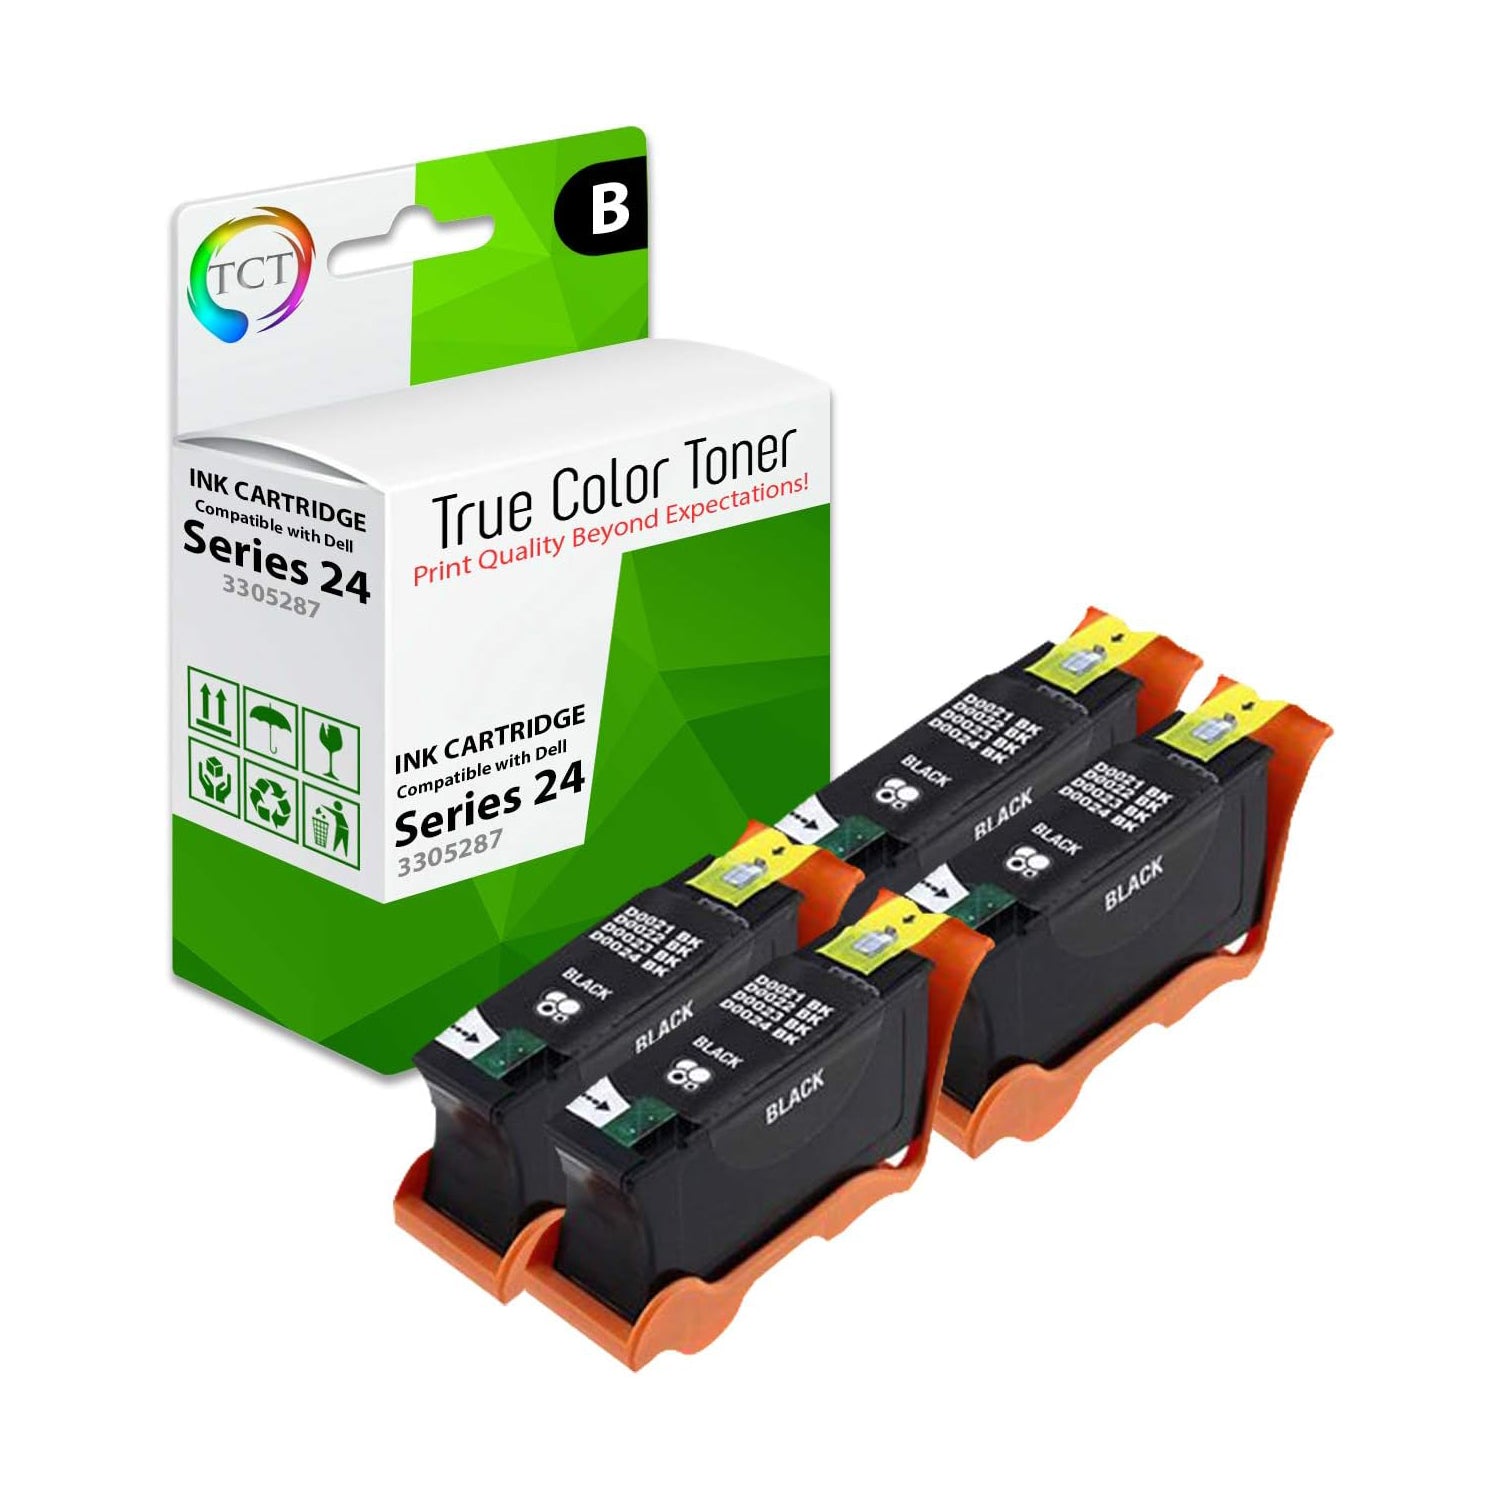 TCT Compatible Ink Cartridge Replacement for the Dell 24 Series Series - 4 Pack Black